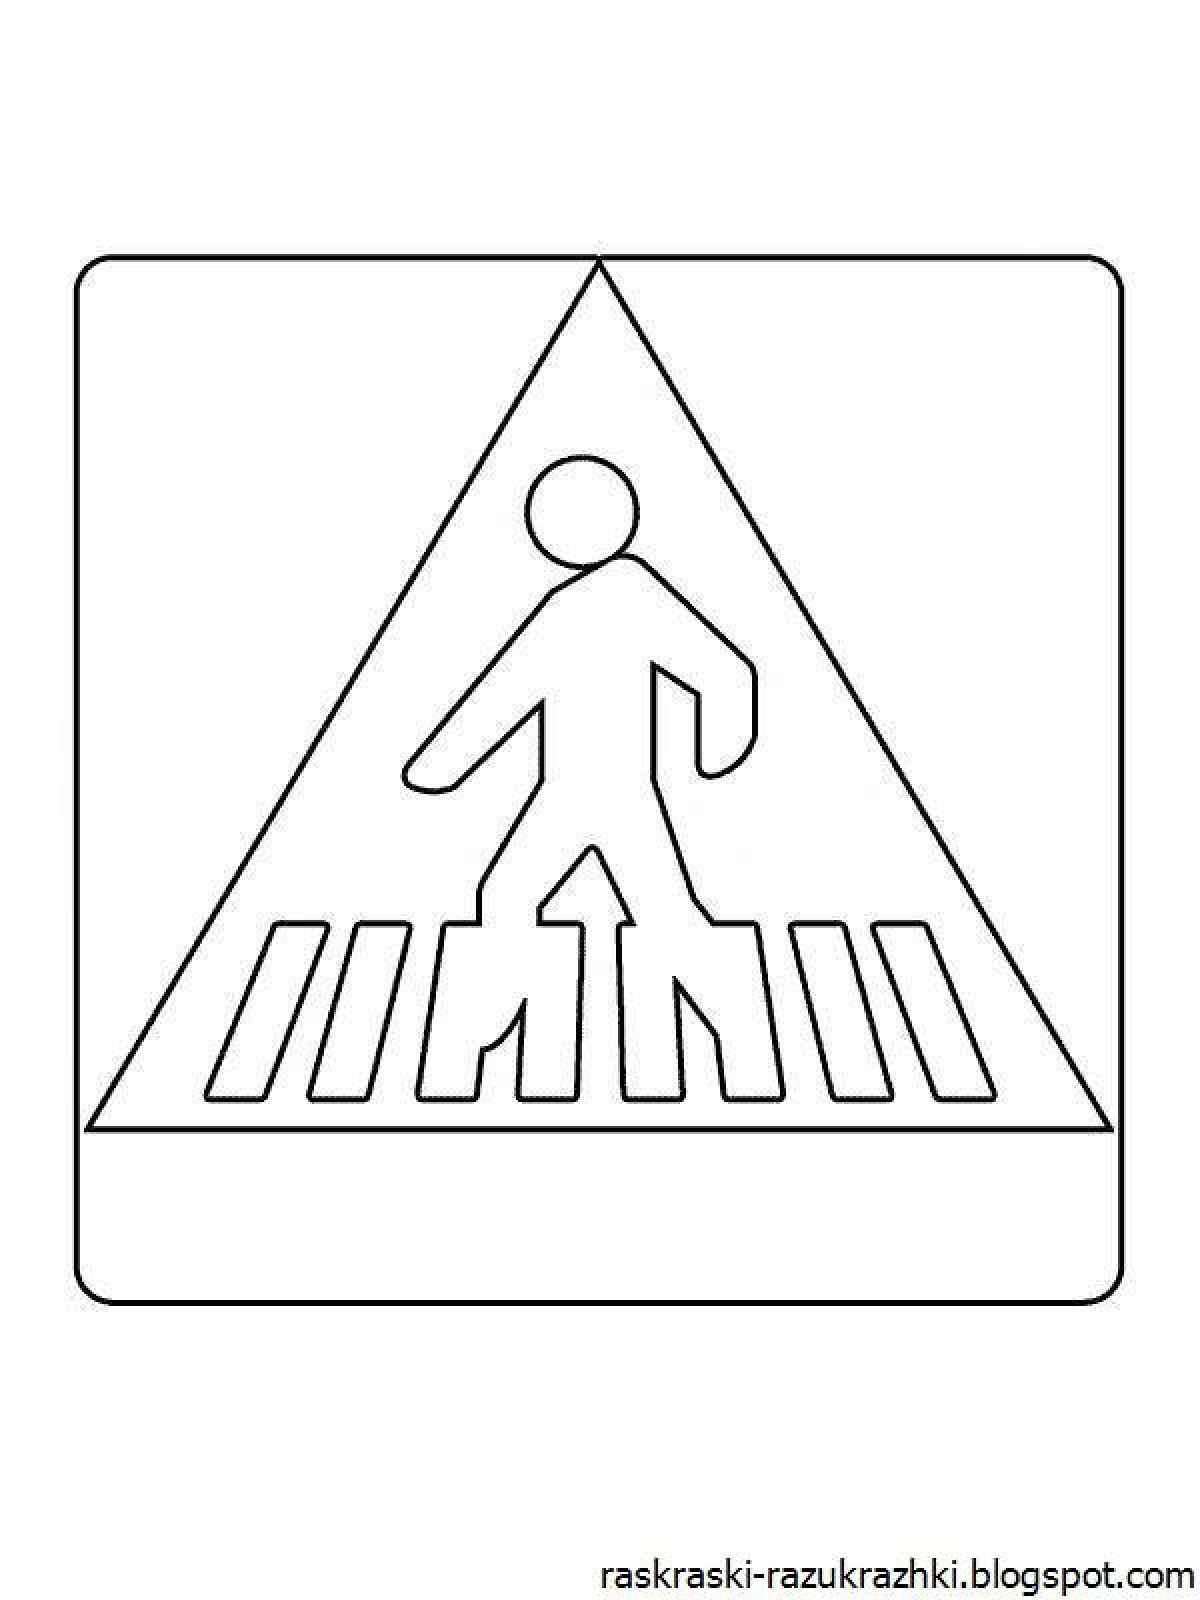 Adorable crosswalk sign coloring page